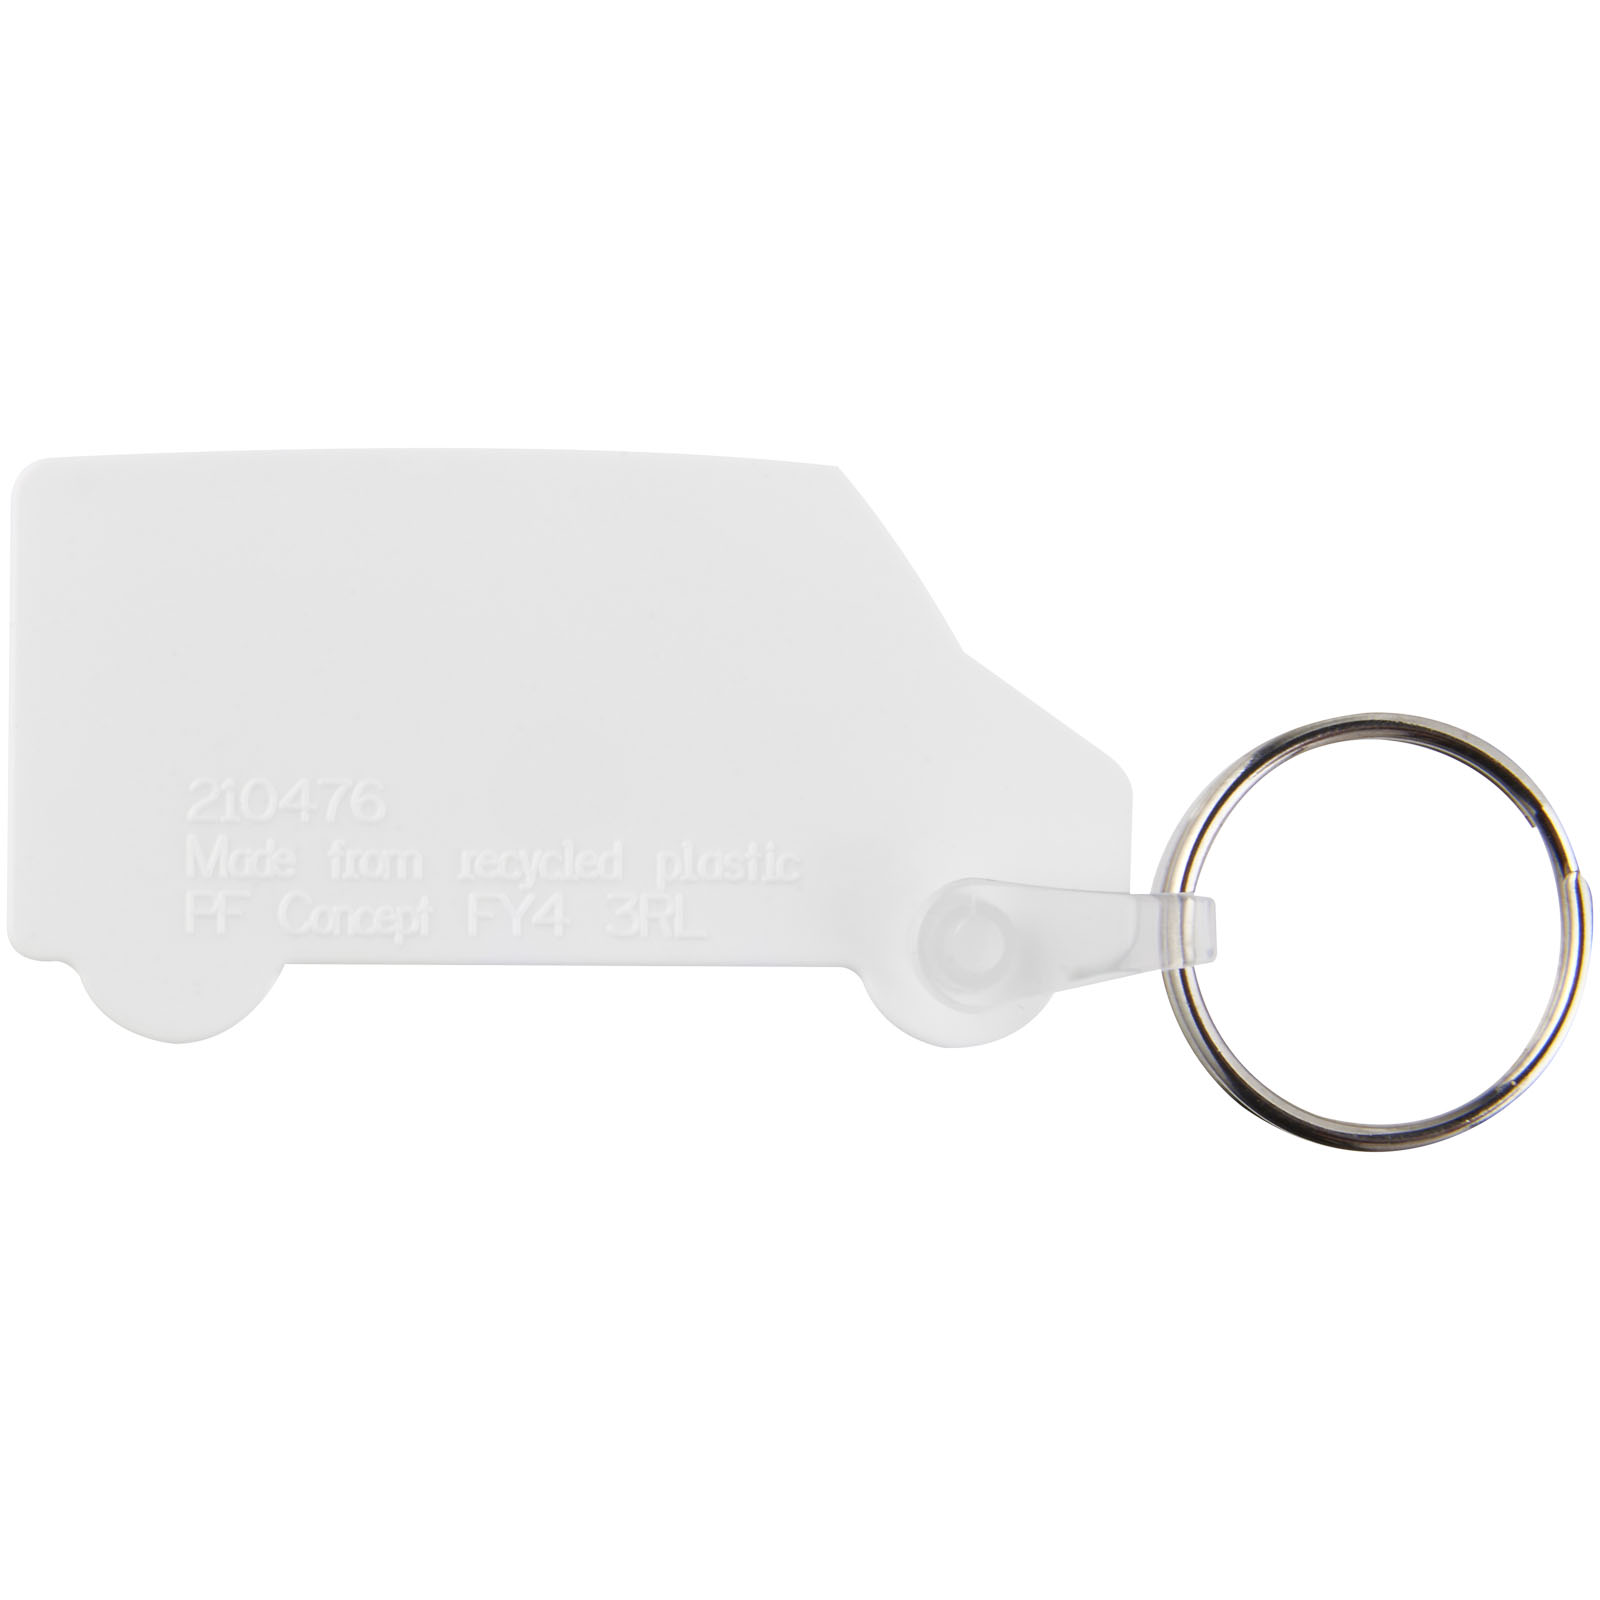 Advertising Keychains & Keyrings - Tait van-shaped recycled keychain - 2